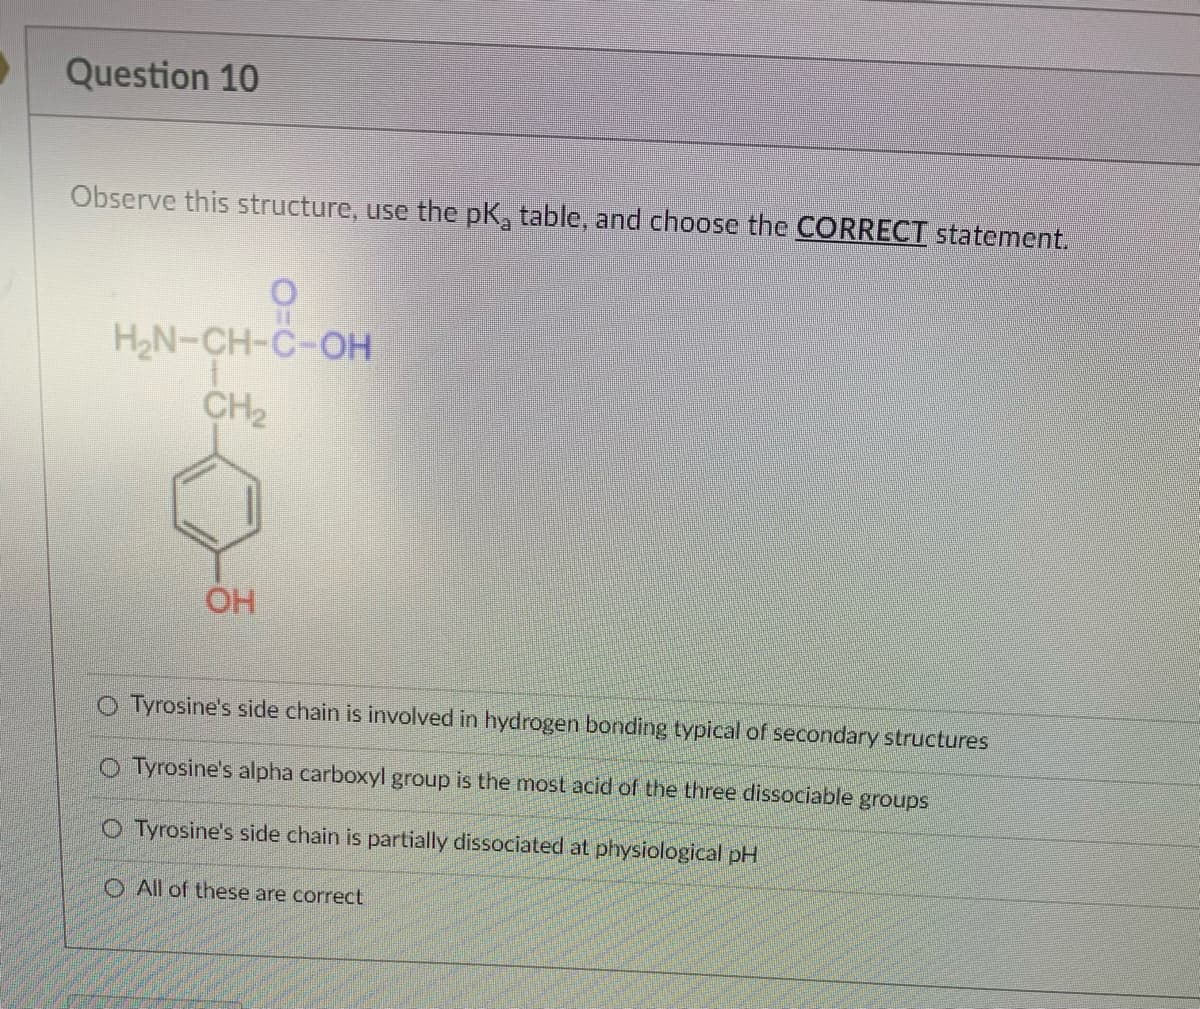 Question 10
Observe this structure, use the pK, table, and choose the CORRECT statement.
H2N-CH-C-OH
CH2
OH
O Tyrosine's side chain is involved in hydrogen bonding typical of secondary structures
O Tyrosine's alpha carboxyl group is the most acid of the three dissociable groups
O Tyrosine's side chain is partially dissociated at physiological pH
O All of these are correct
